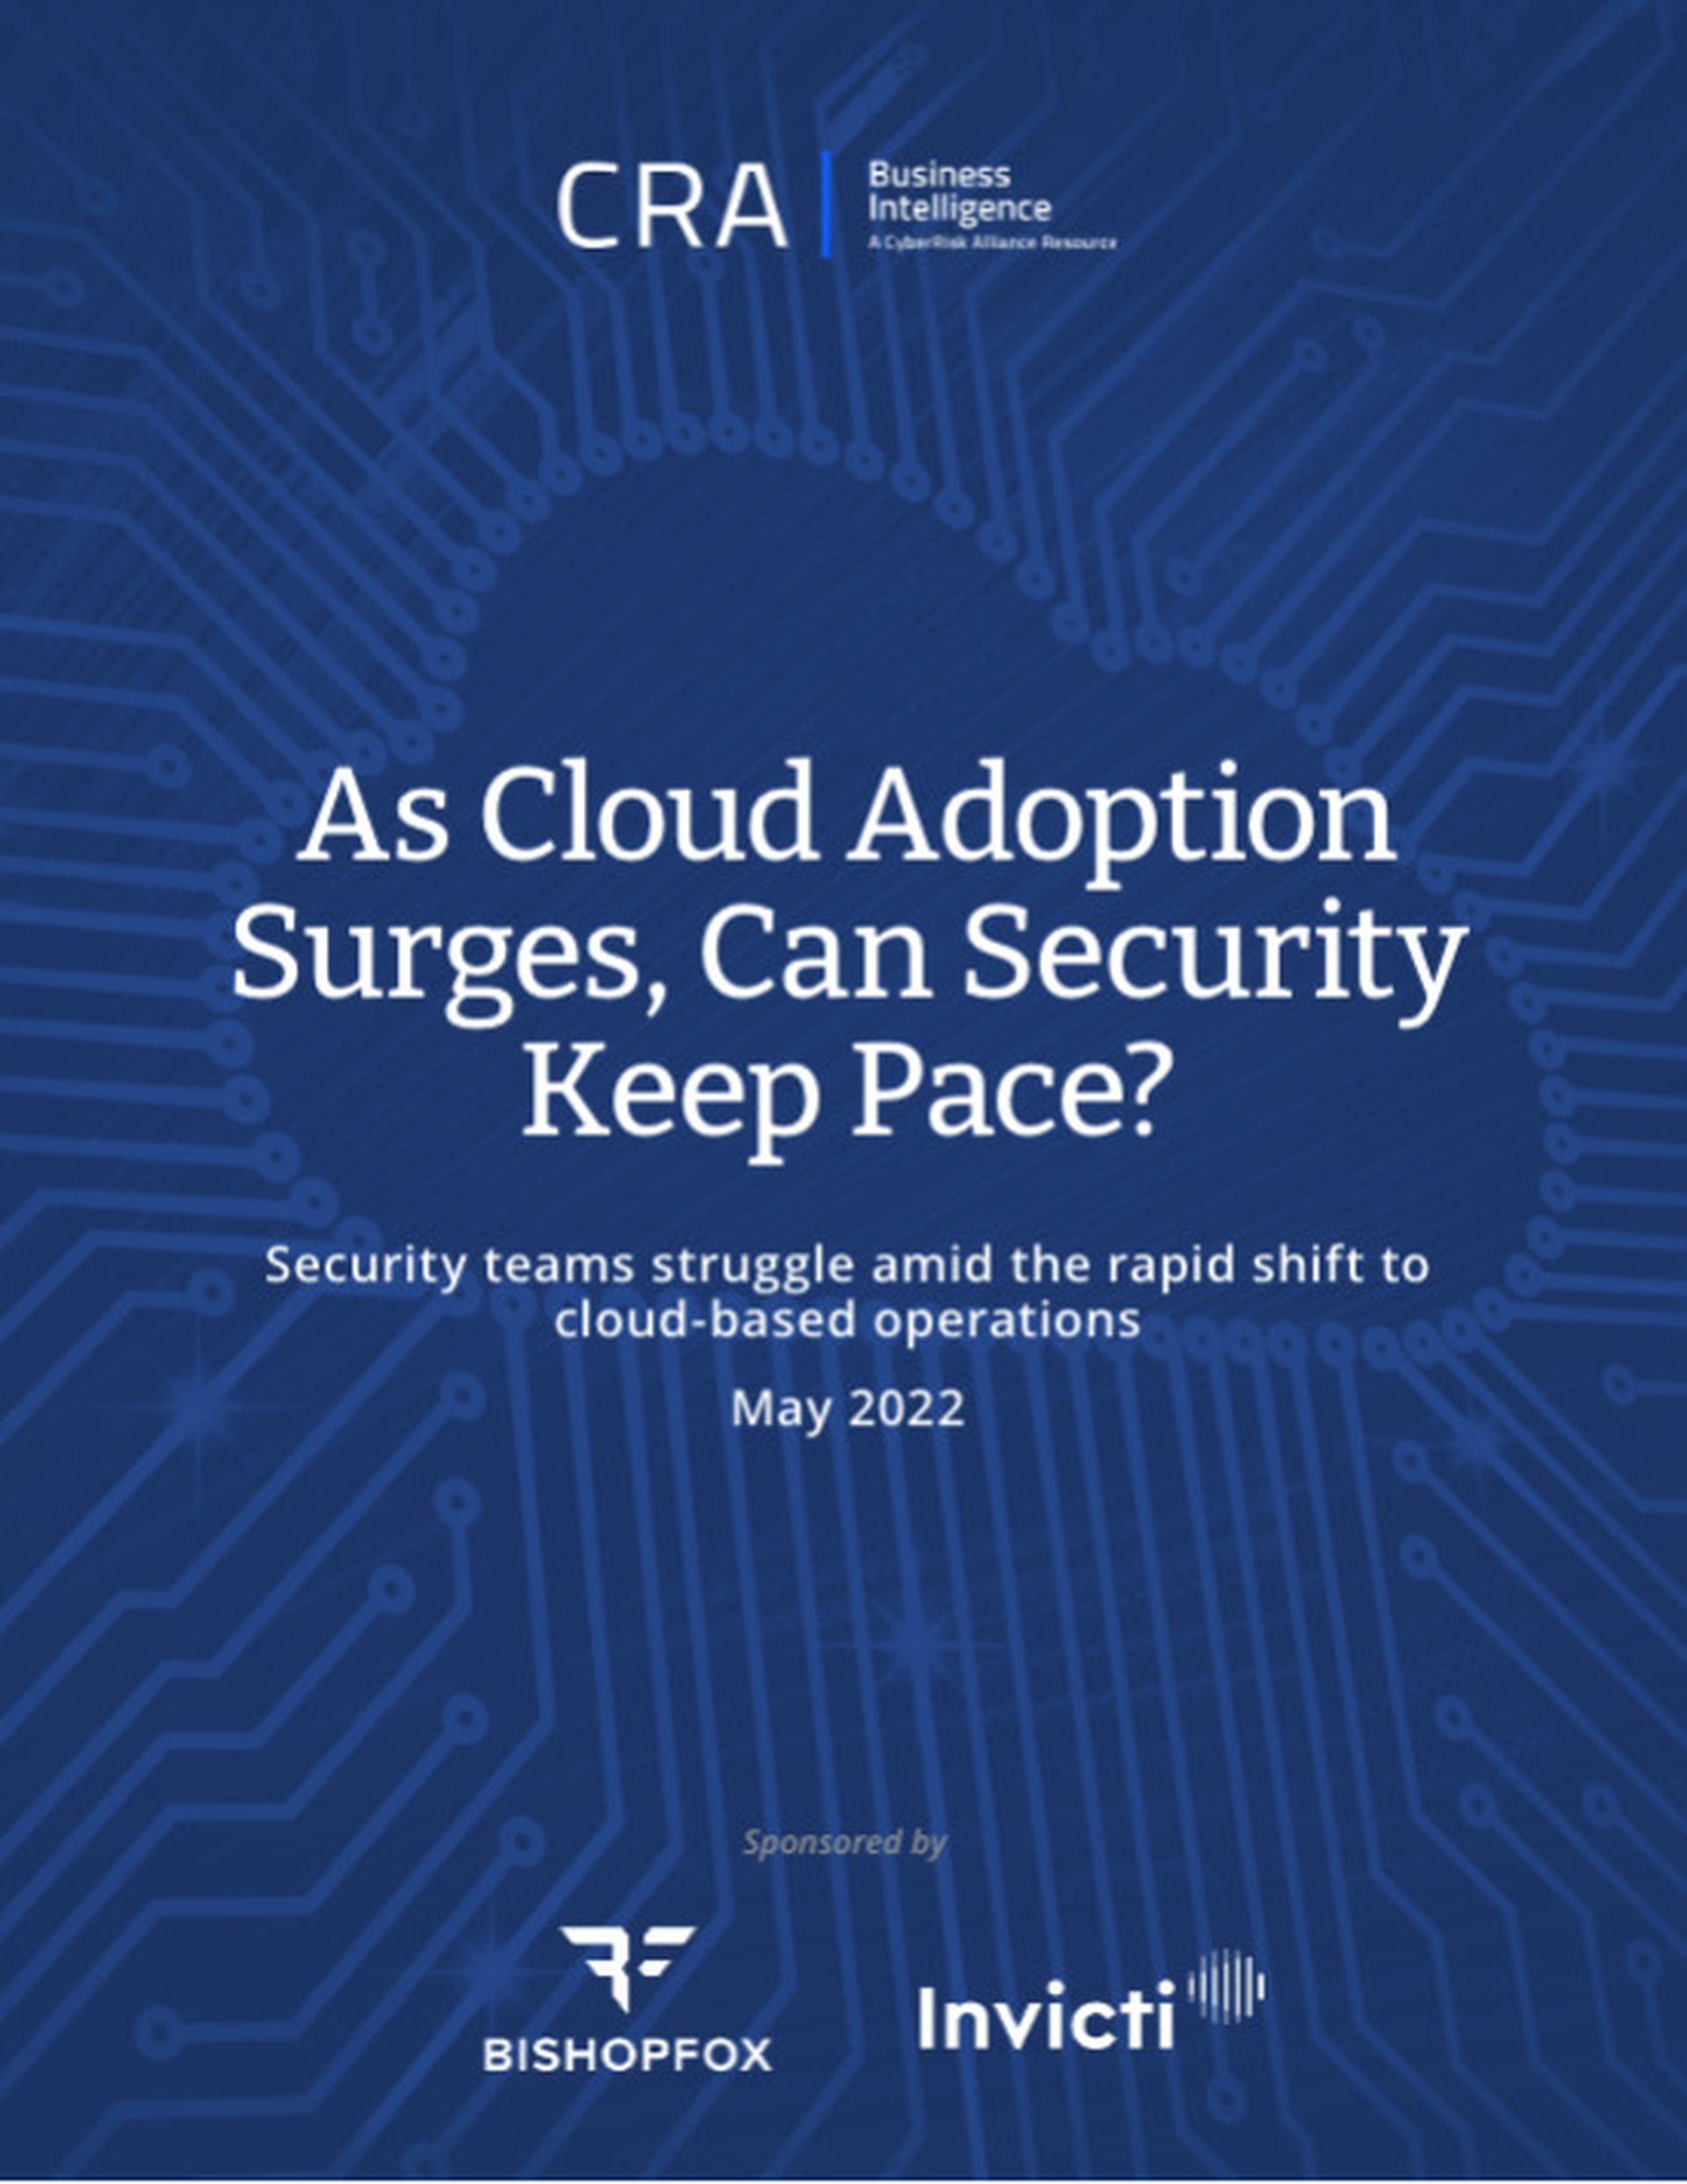 CRA Study: As Cloud Adoption Surges, Can Security Keep Pace?